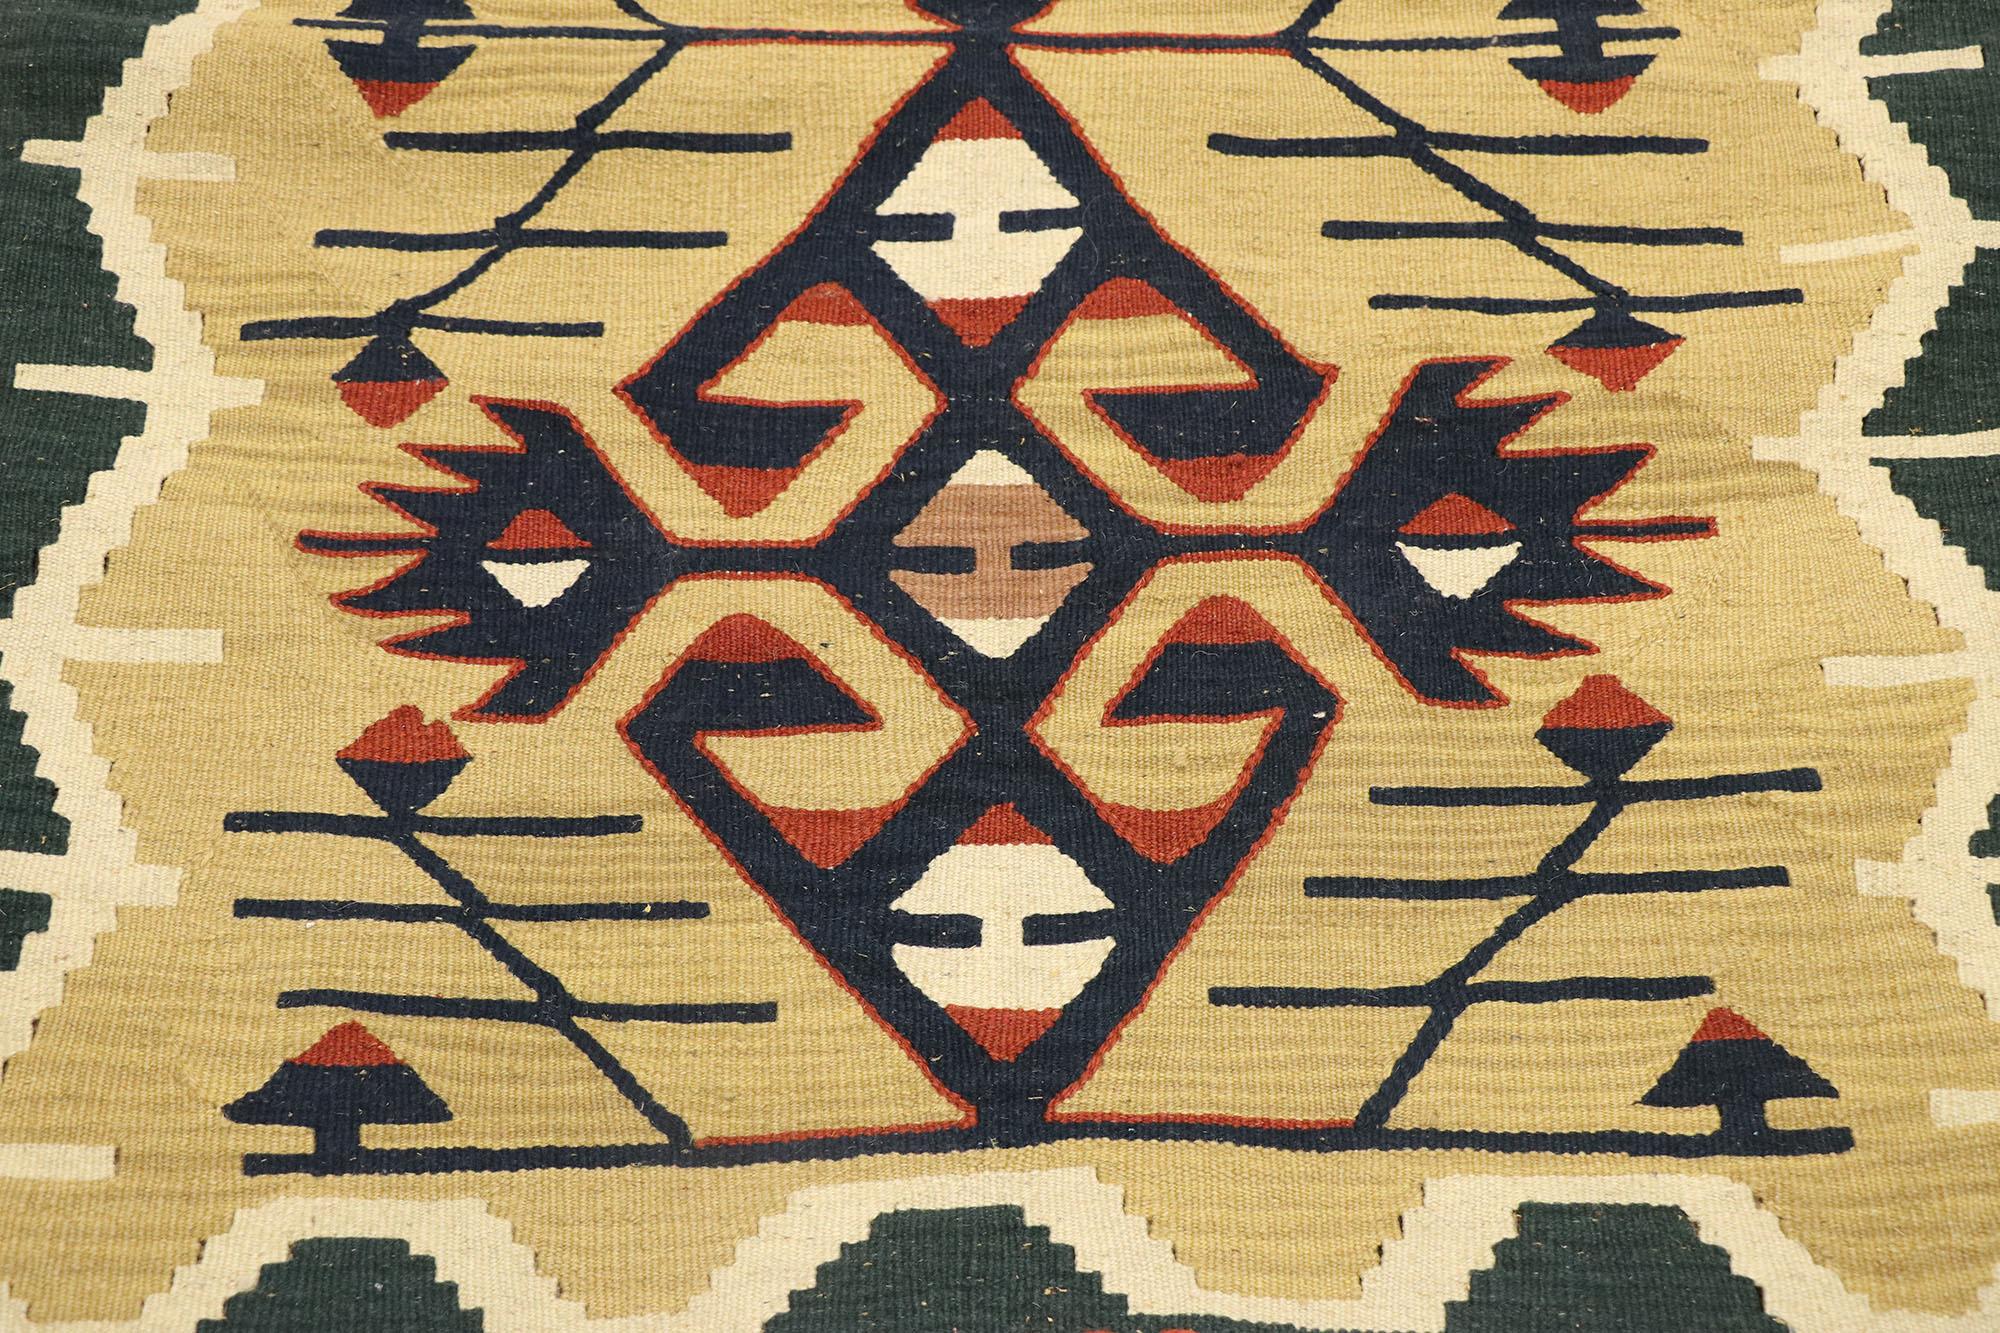 Hand-Woven Vintage Persian Shiraz Kilim Rug, Modern Southwest Style Meets Luxury Lodge For Sale